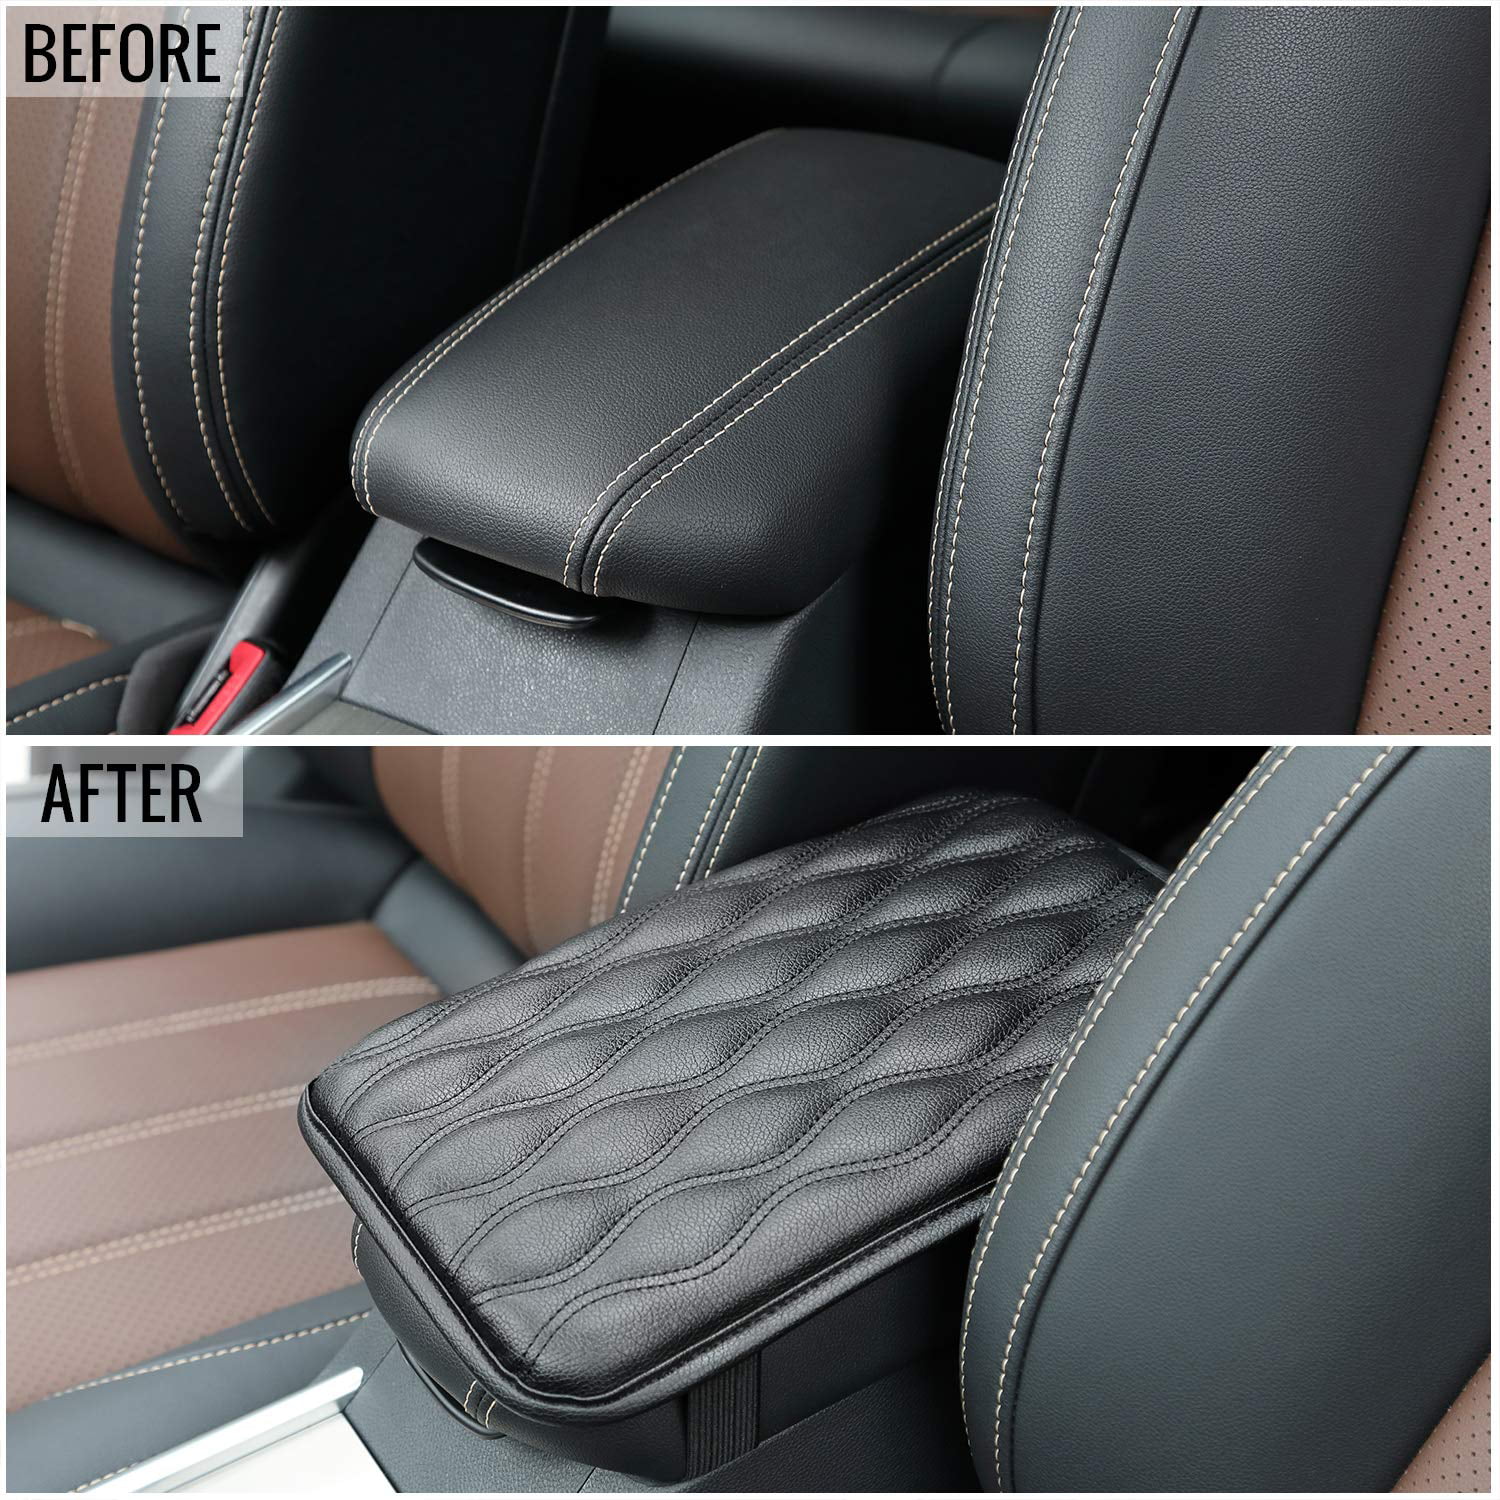 SUHU Auto Center Console Cover Pad Fit for SUV/Truck/Car Waterproof Car Armrest Seat Box Cover 11.57 * 8.18 inch, Buff Buff Leather Auto Armrest Cover 